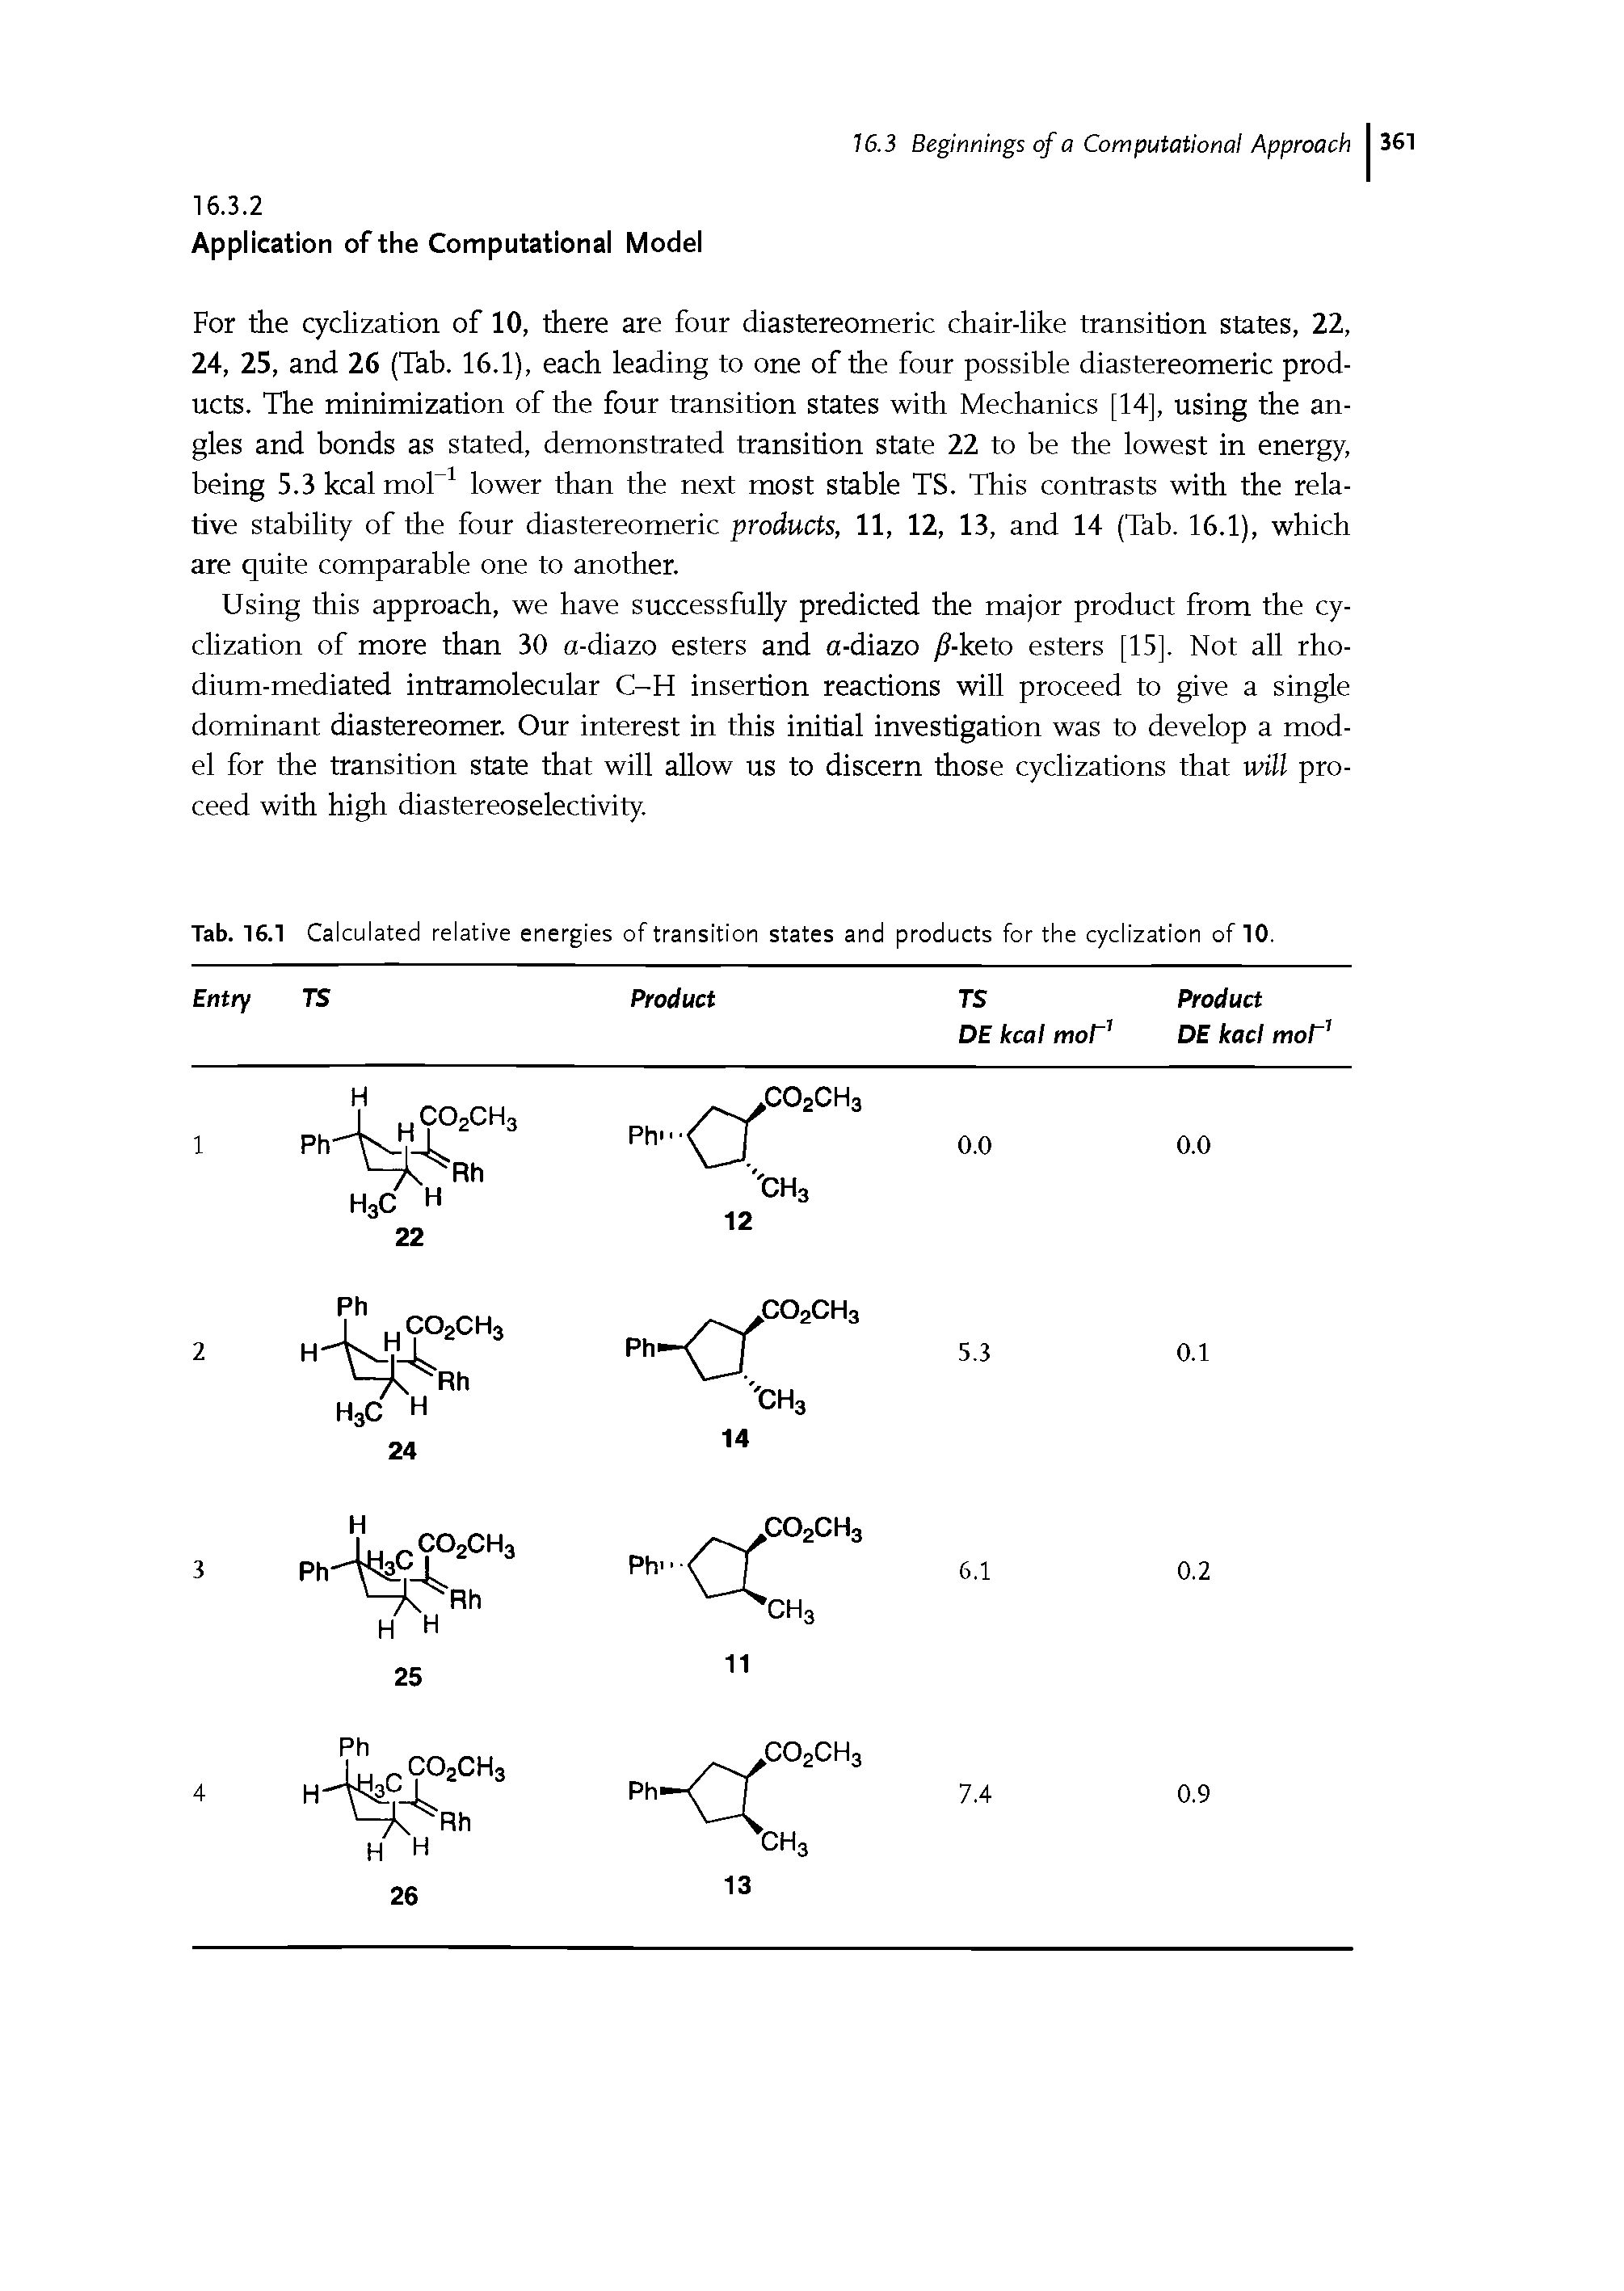 Tab. 16.1 Calculated relative energies of transition states and products for the cyclization of 10.